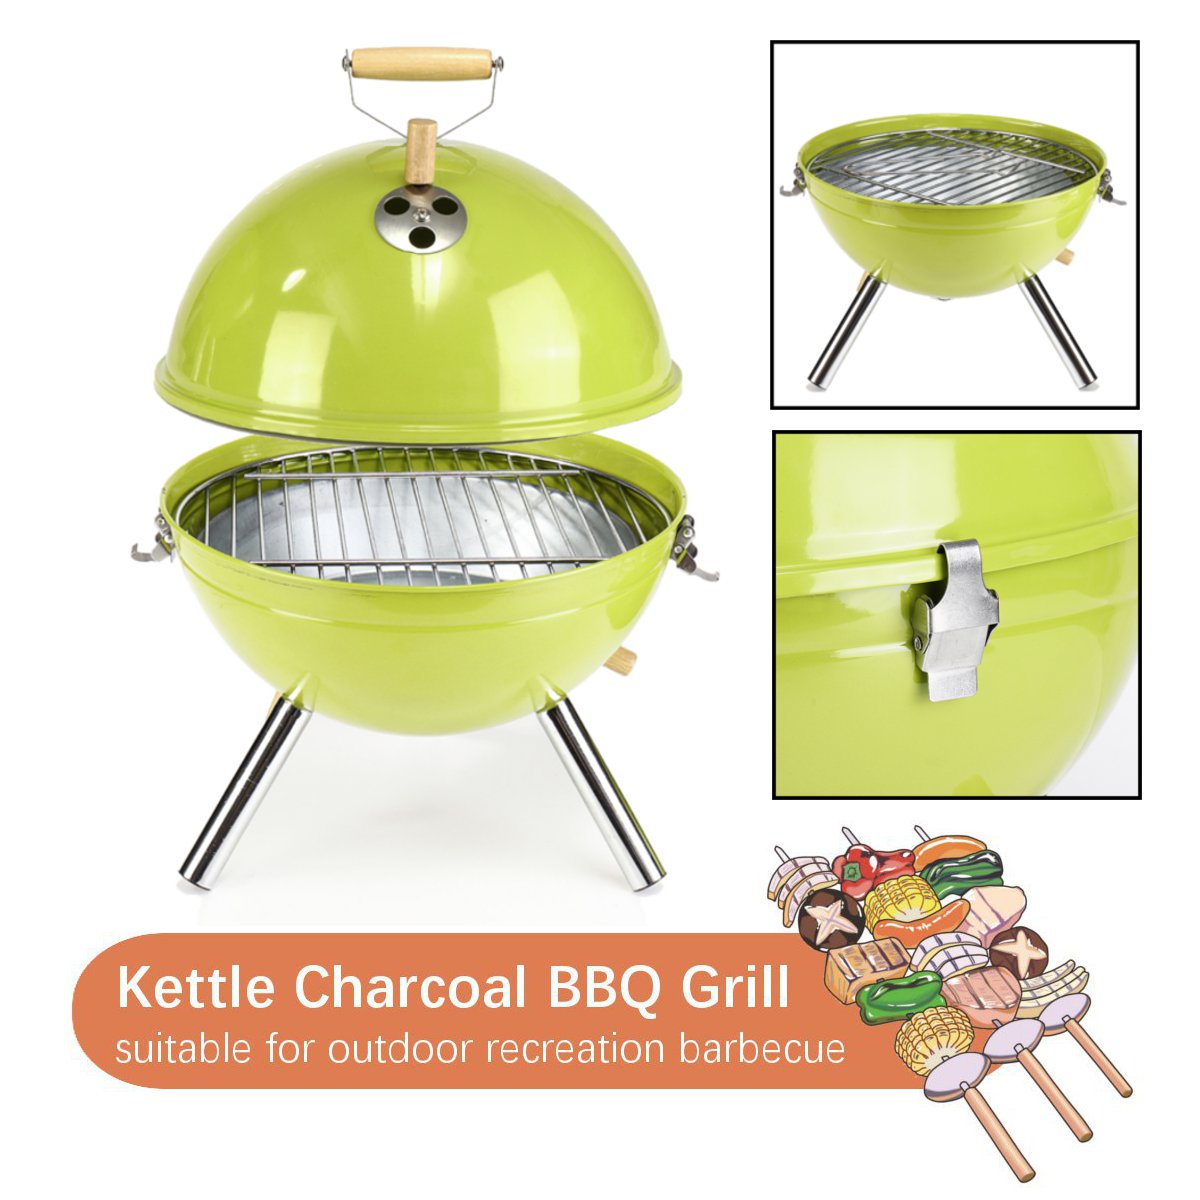 30x44cm-Iron-Oven-BBQ-Grill-Charcoal-Grill-Portable-Party-Accessories-Household-Barbecue-Tools-1563711